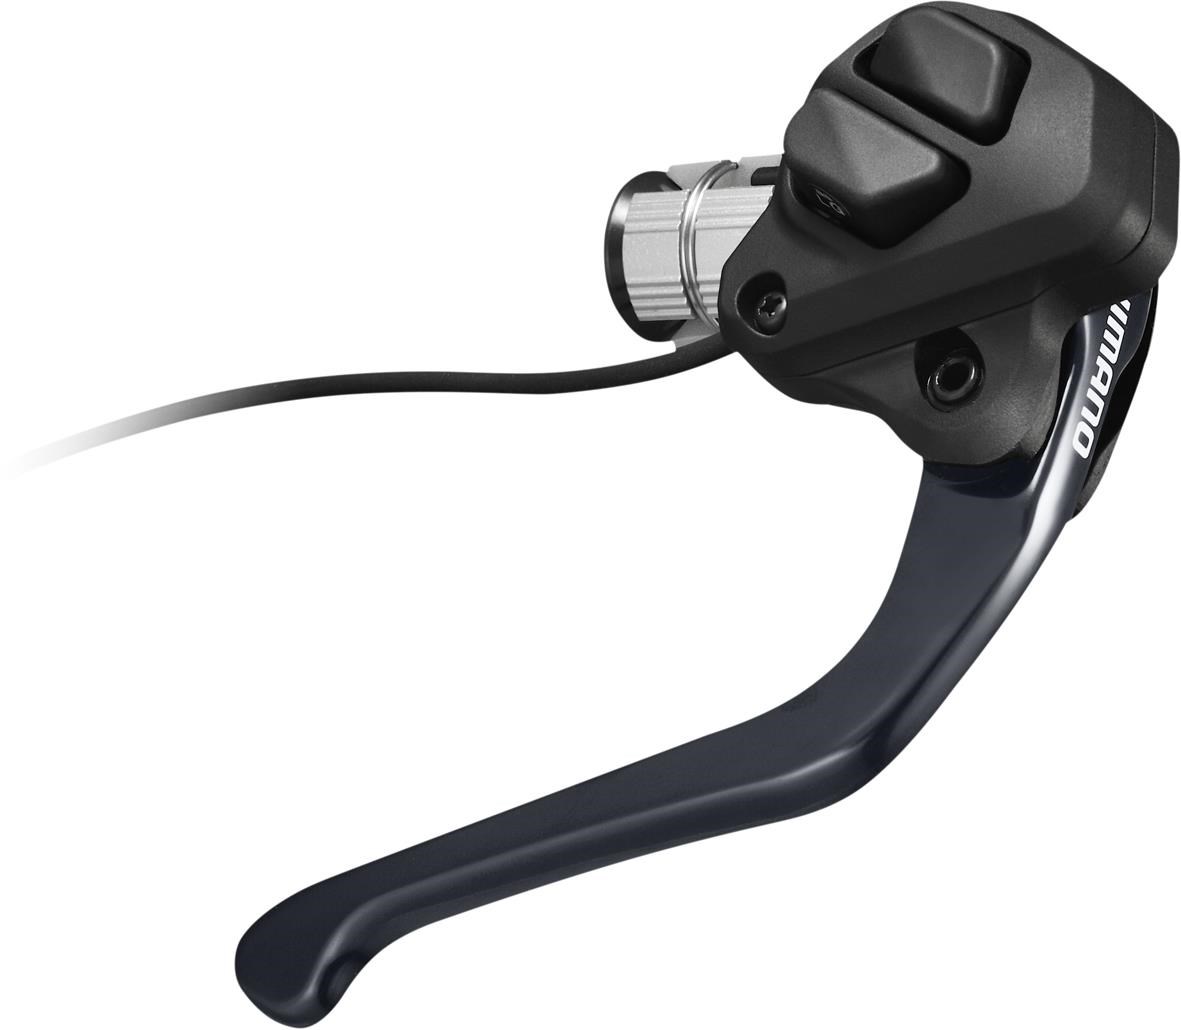 Shimano ST-6871 Ultegra Di2 STI For TT / Tri Bar Without Cables, E-Tube, Left Hand product image